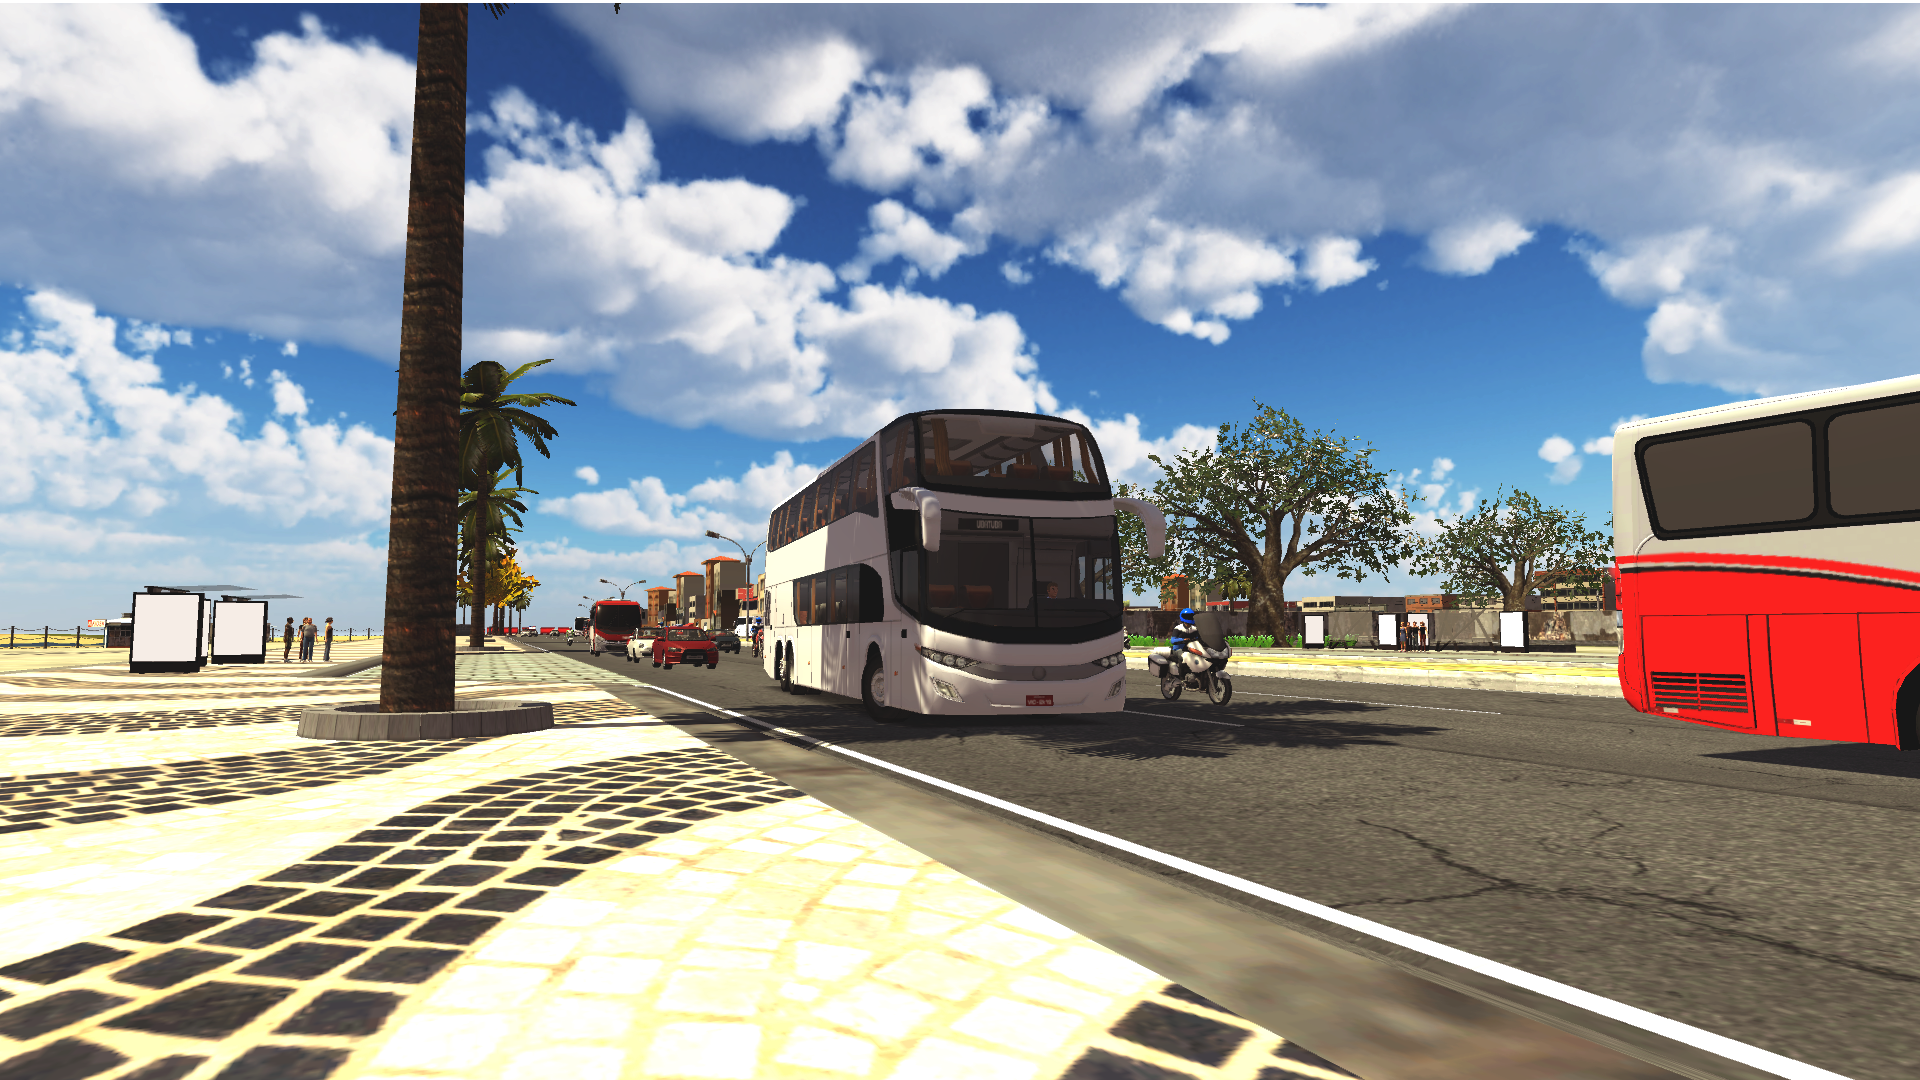 Download Proton Bus Simulator Road - Mods,News e Skins android on PC